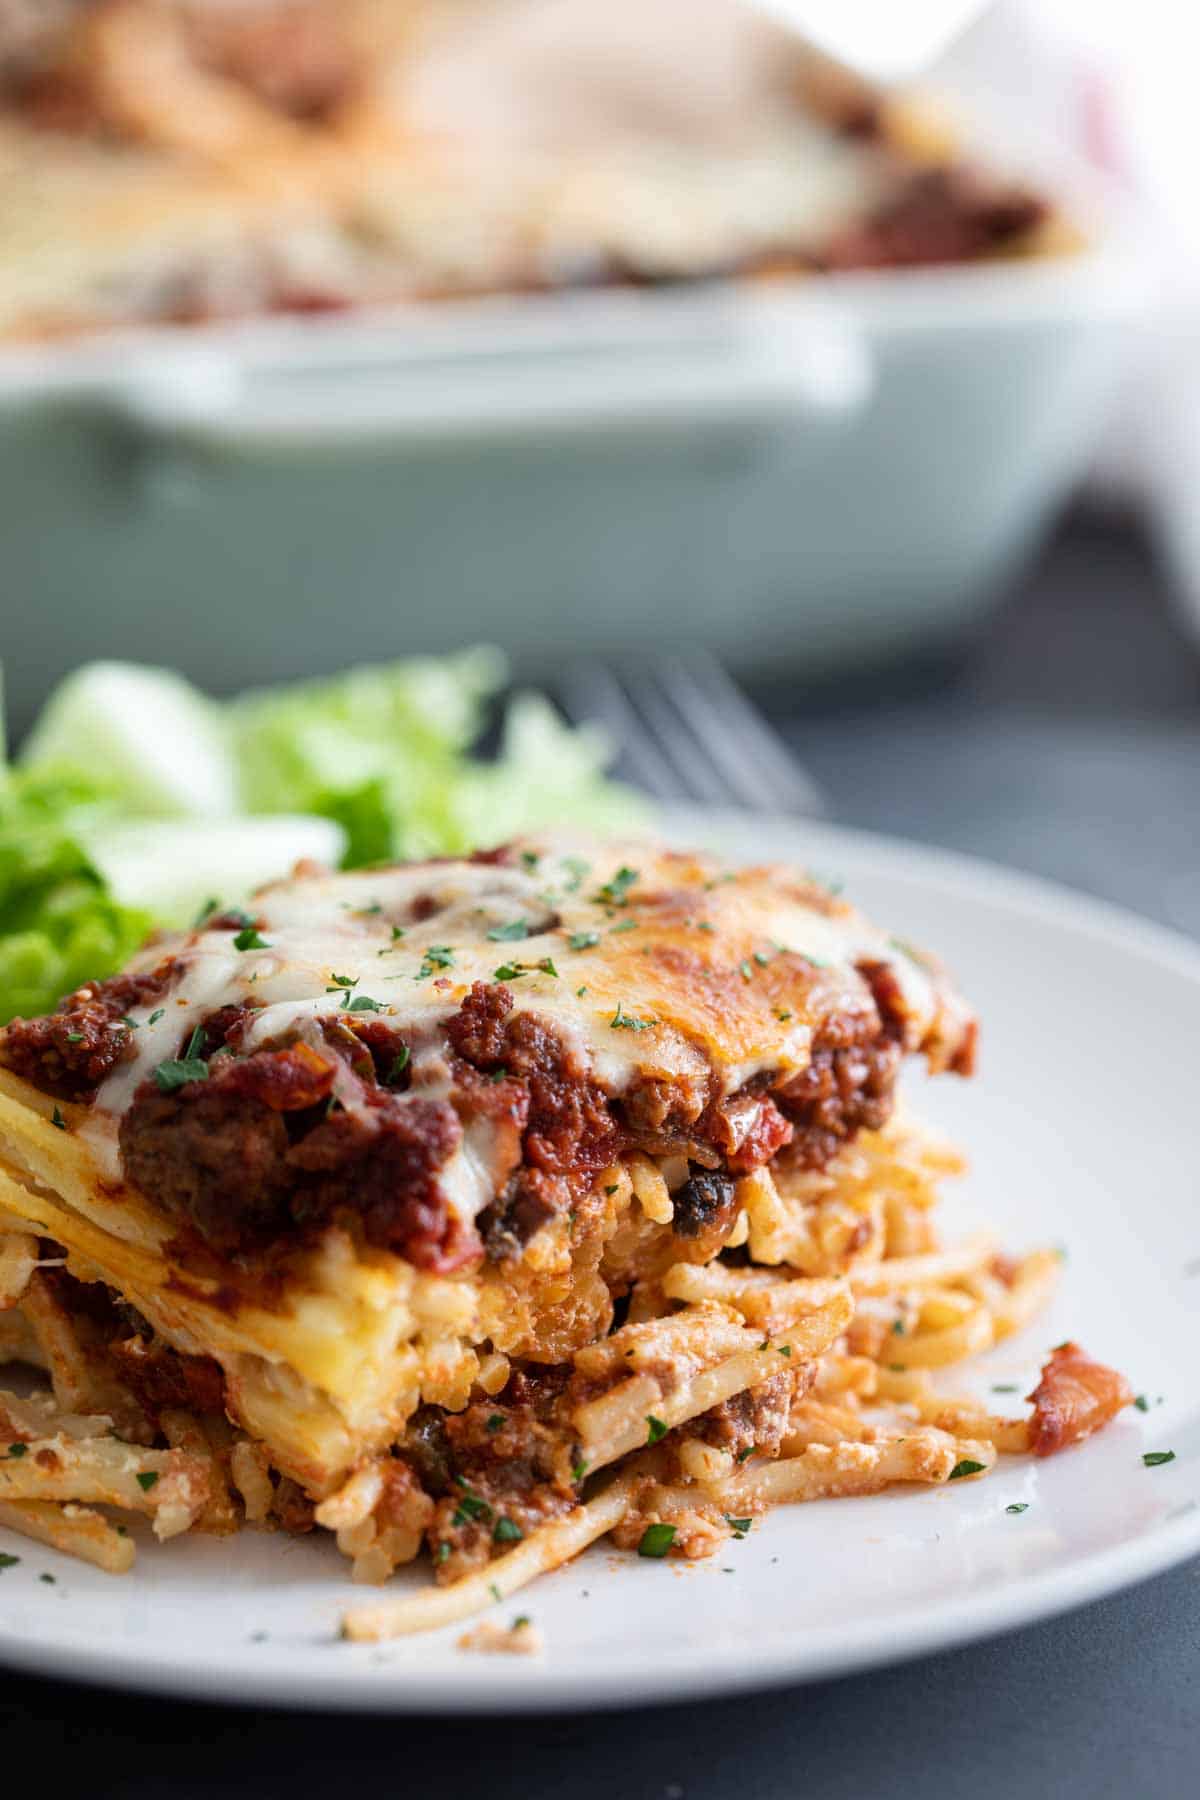 Baked Spaghetti on a Plate